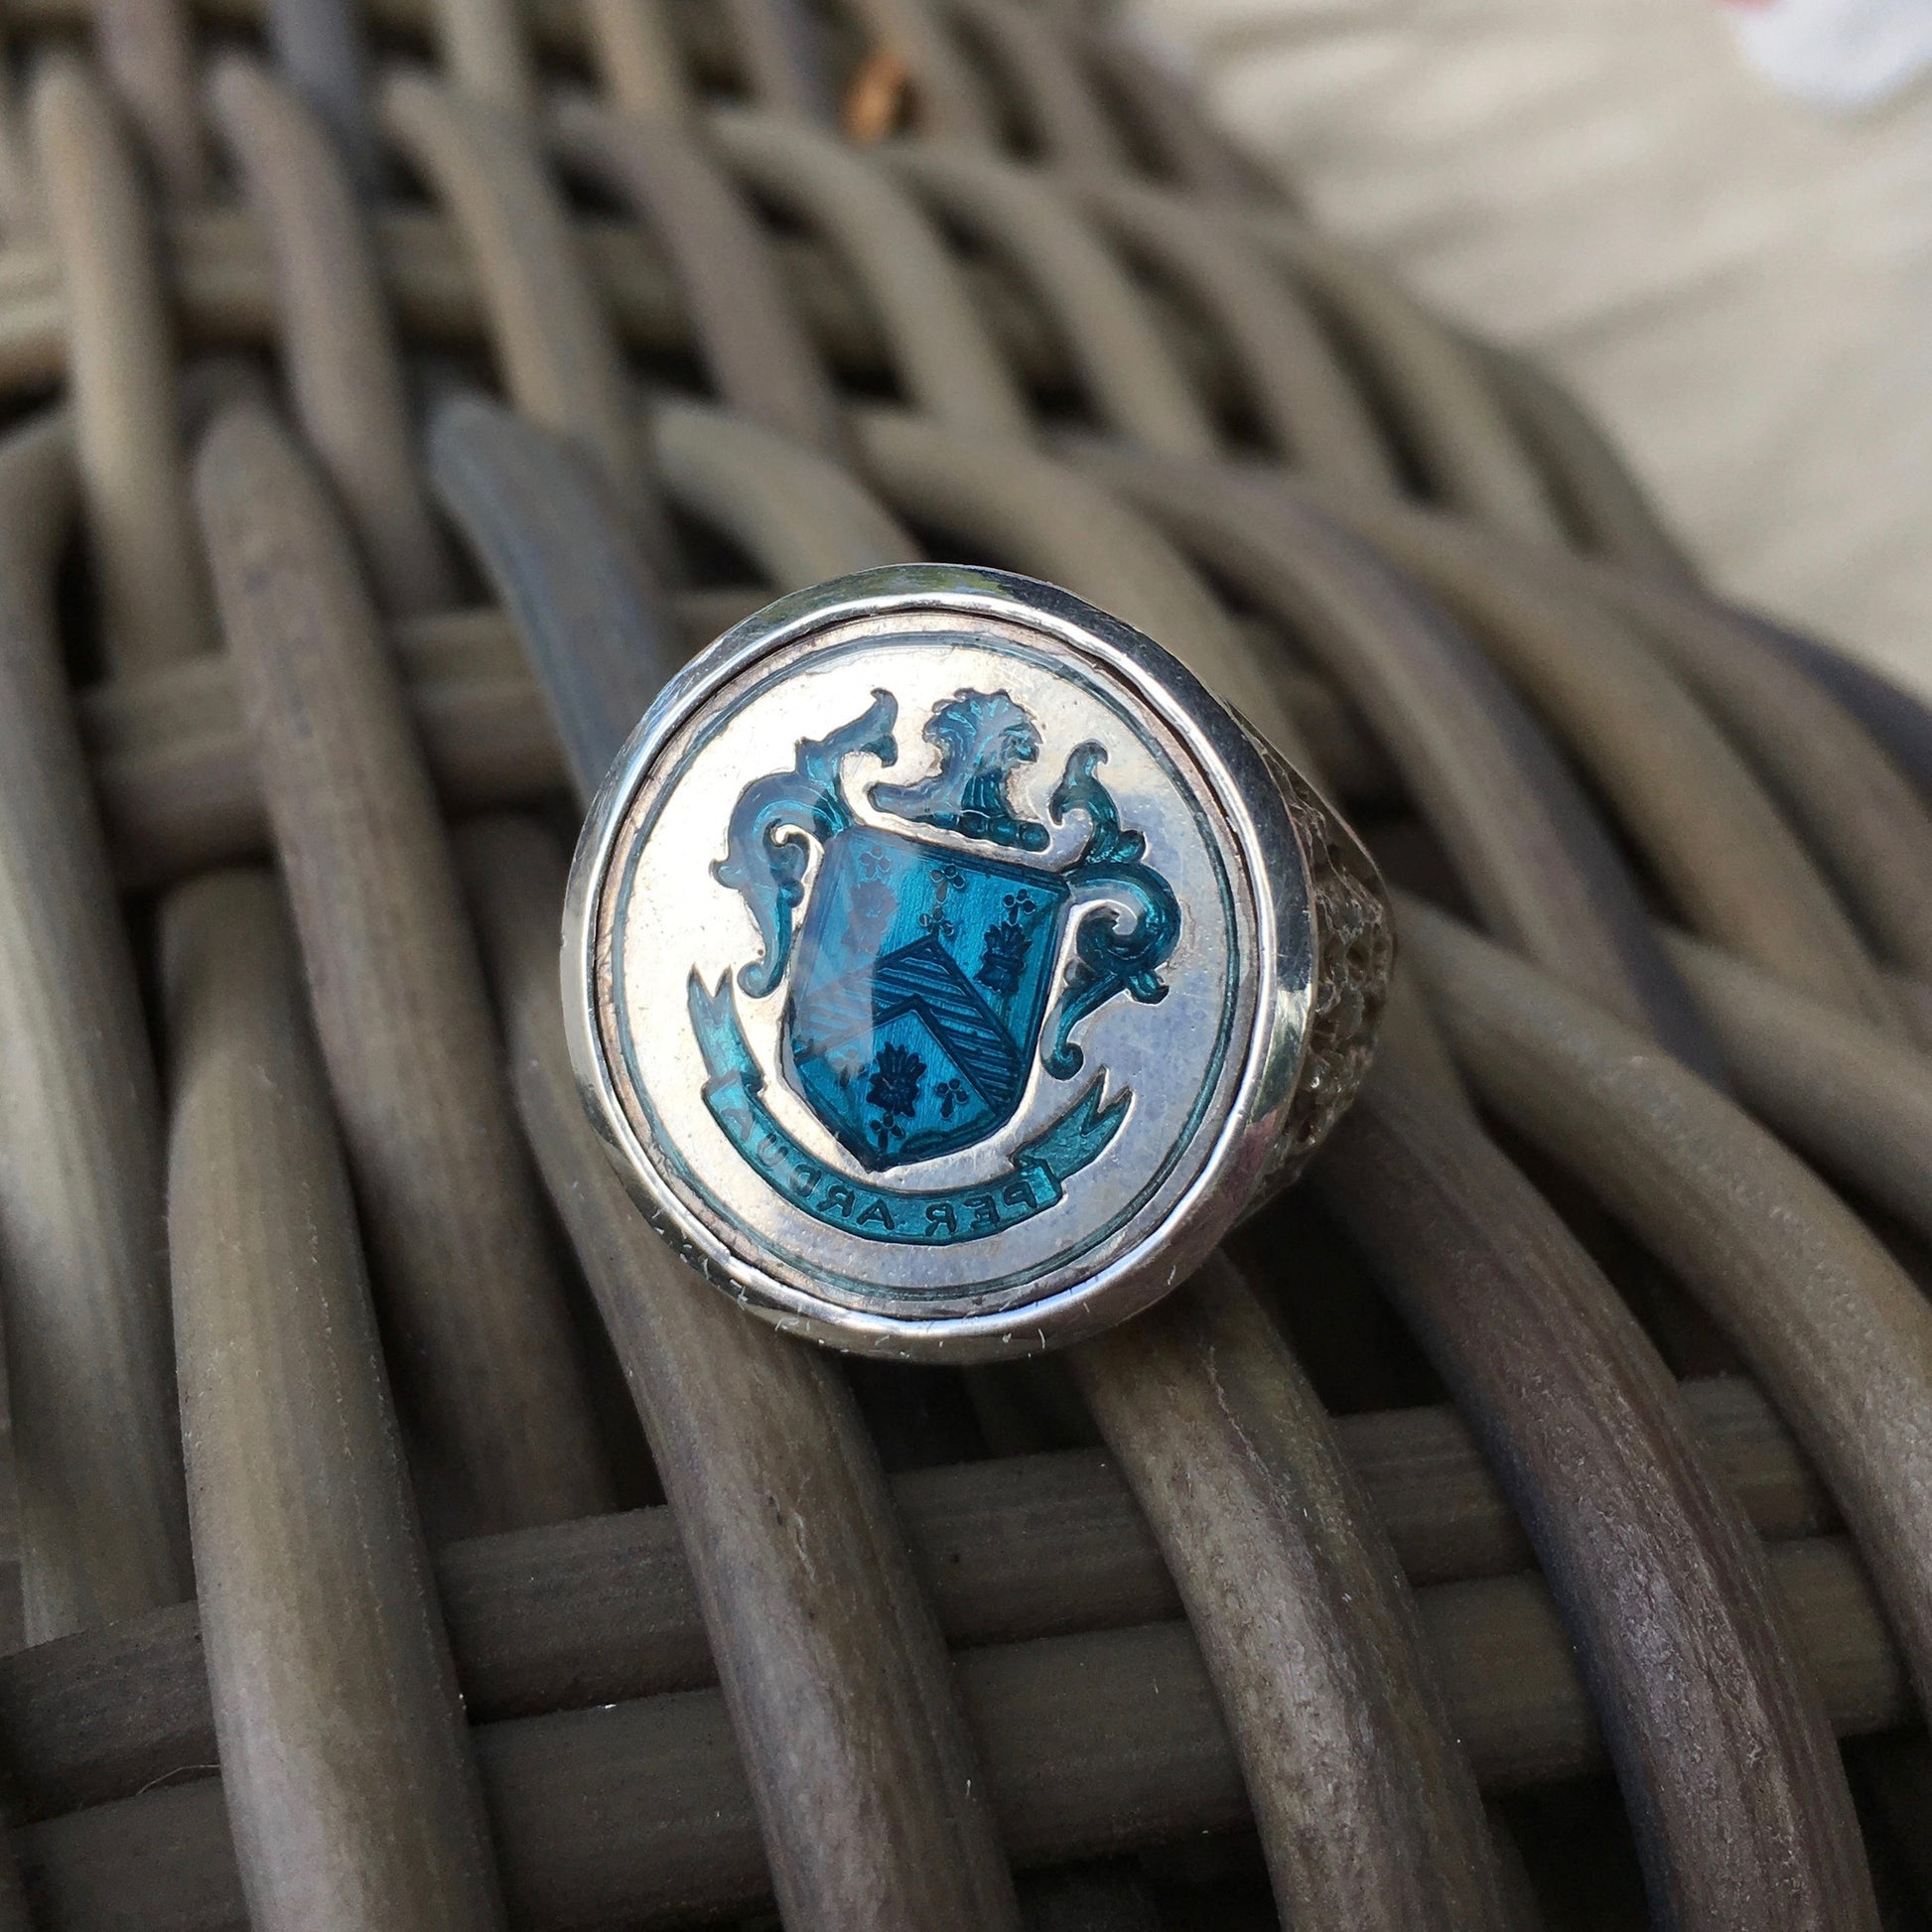 Vintage Antique Silver Signet Coat of Arms Crest Blue Enamel Ring - Hashtag Watch Company